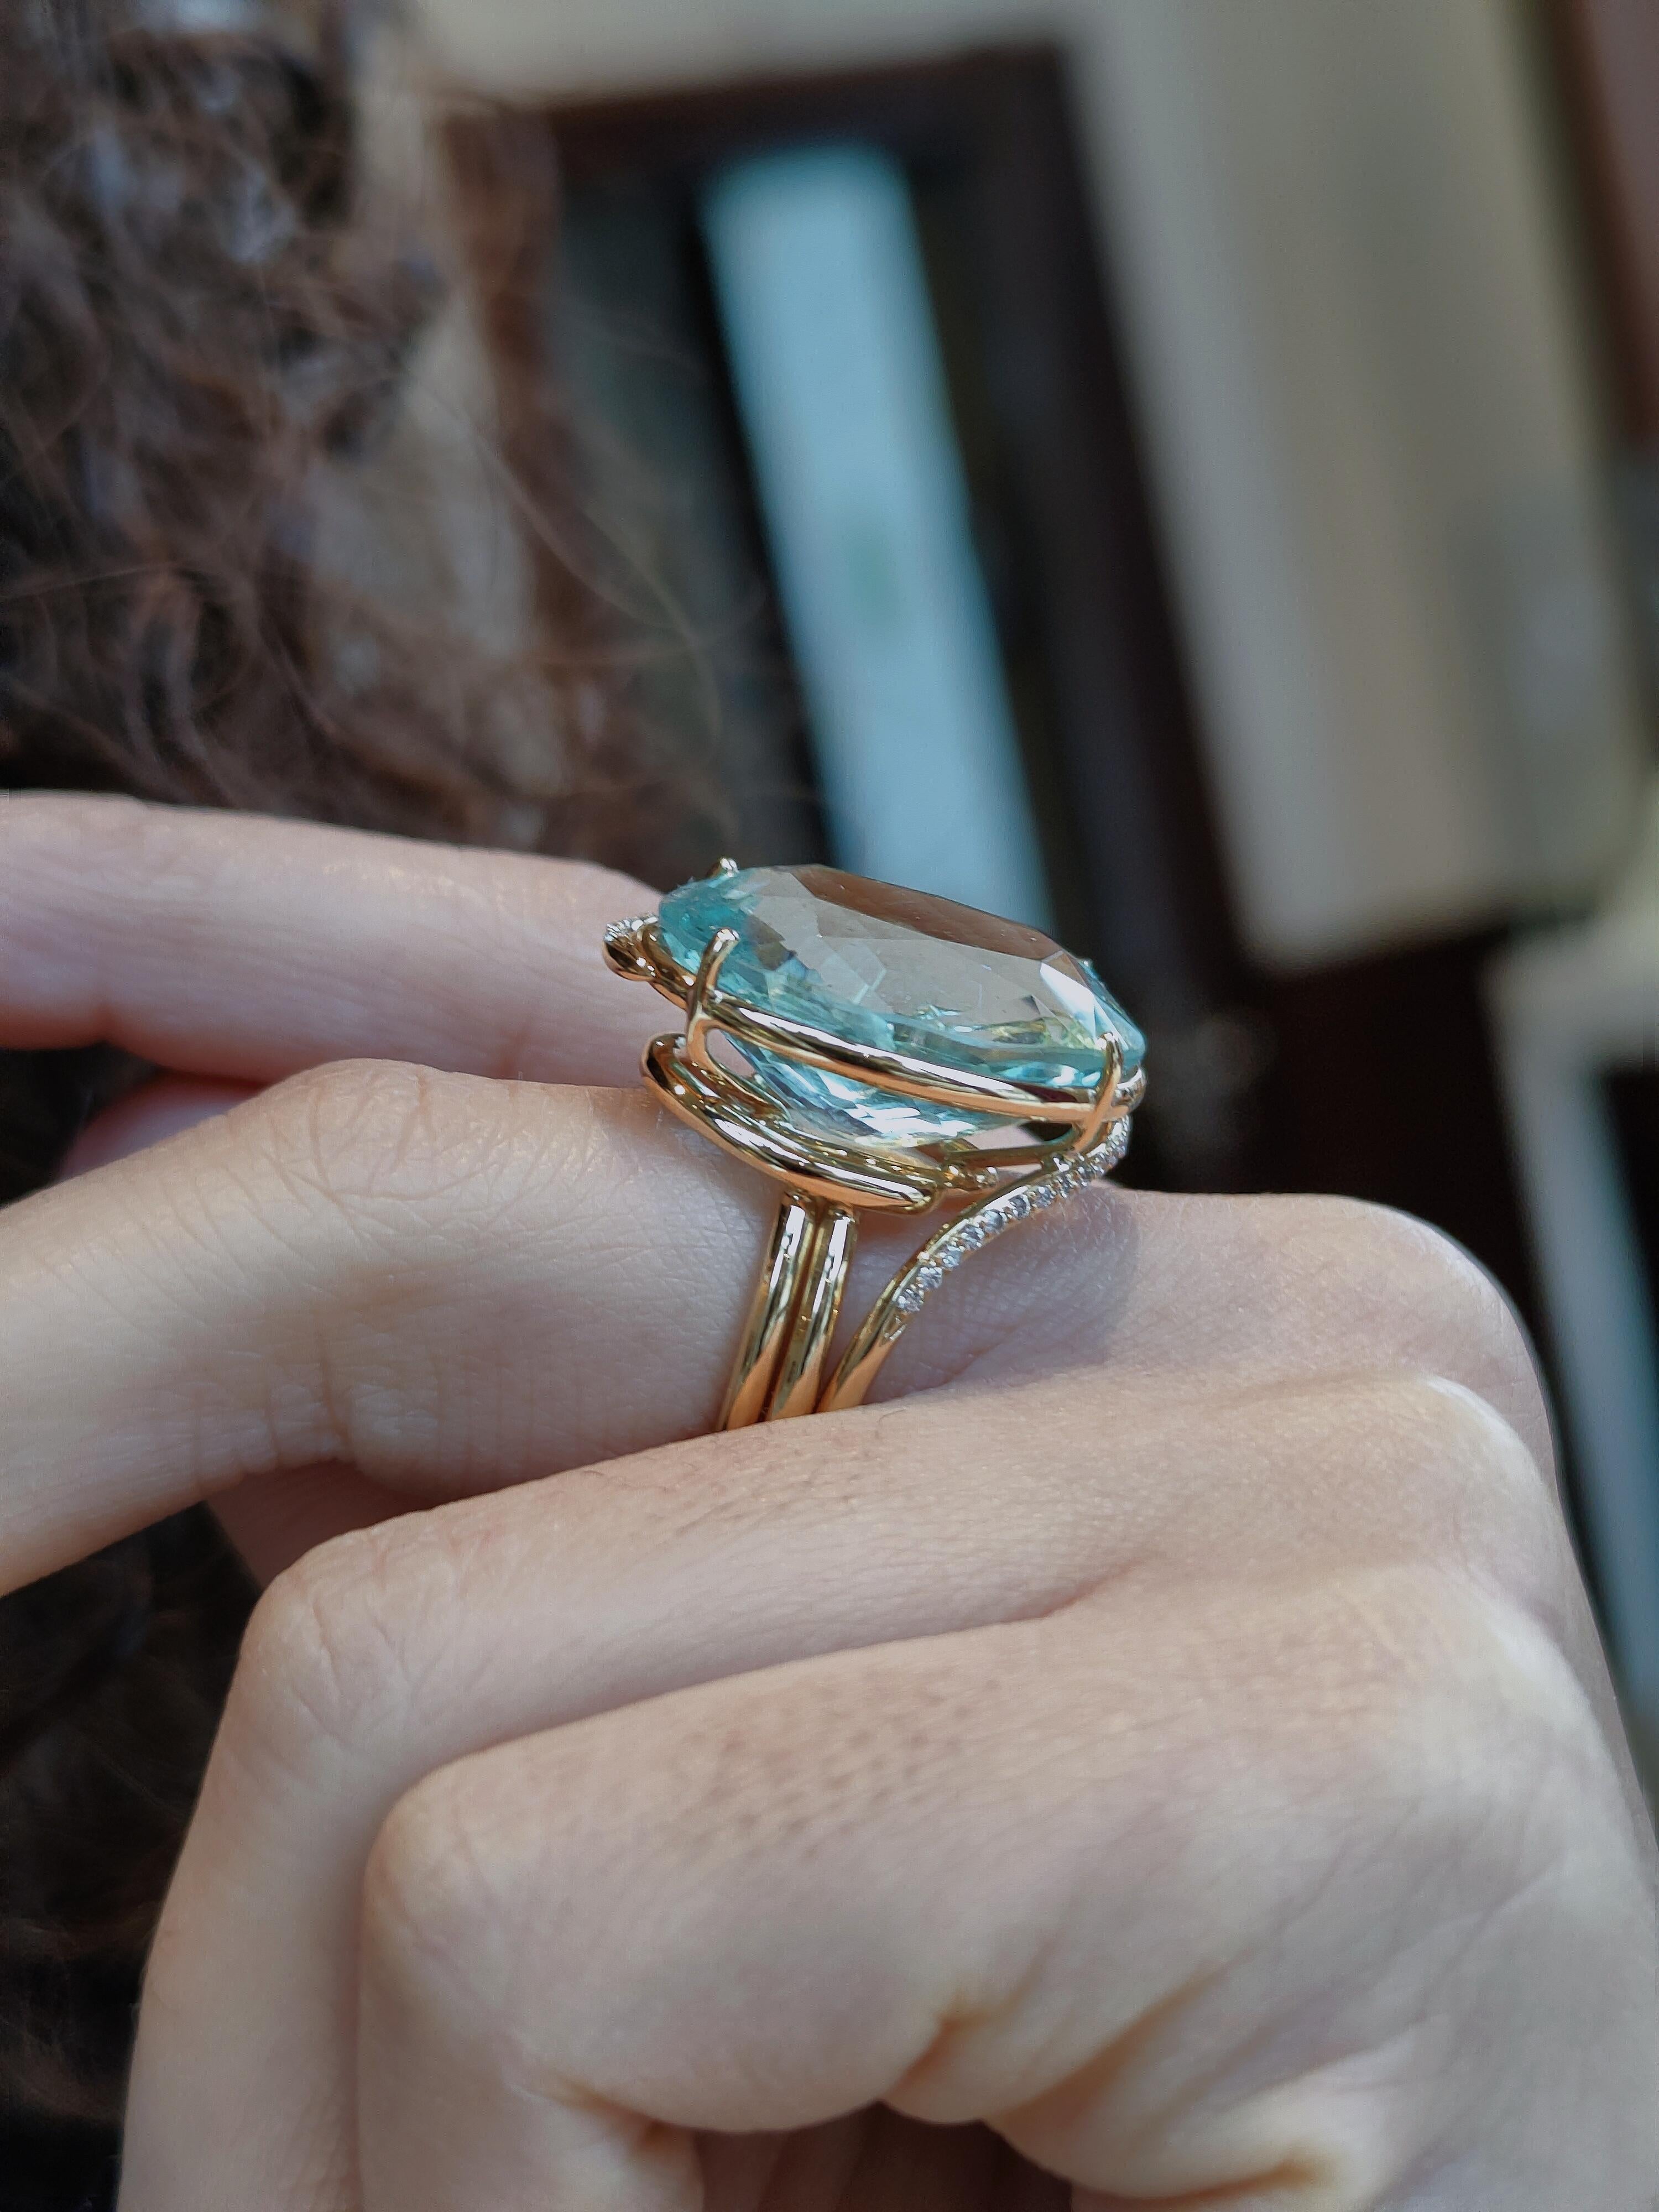 A lovely large 24.58ct oval aquamarine from Africa is set with two diamonds in this pretty 18k yellow gold ring. This natural blue coloured aquamarine with sea green highlights measures 22x 17mm.
Some natural inclusions are visible but do not